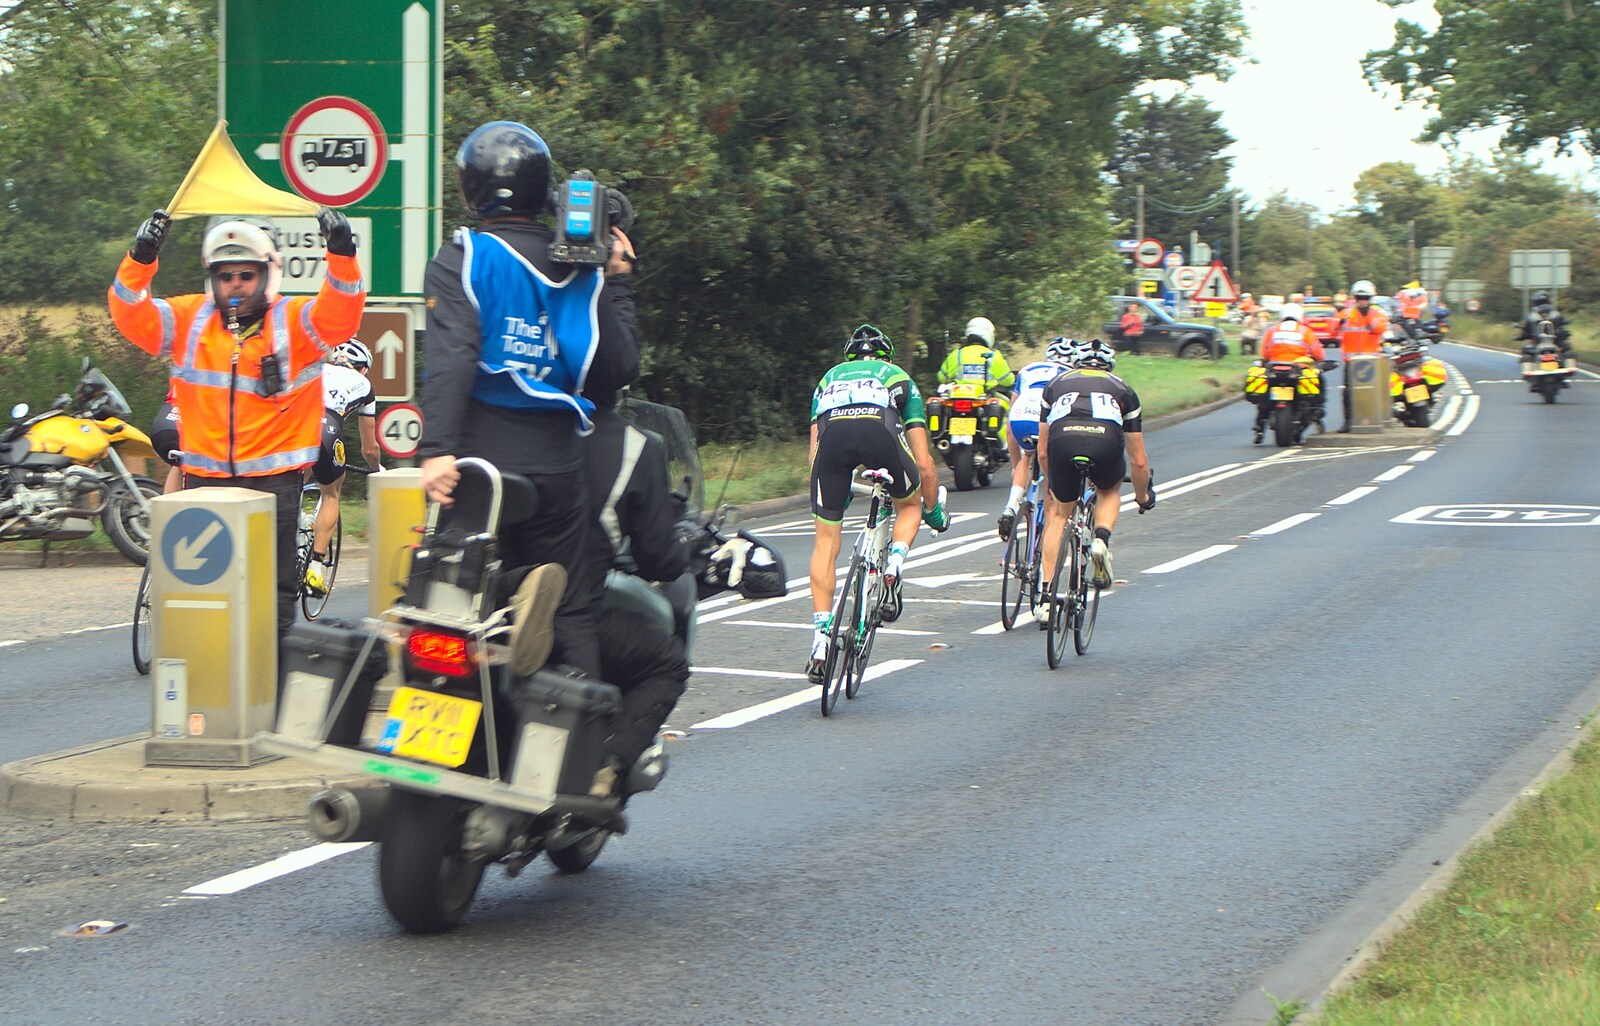 The first group head up the A140 from The Tour of Britain, Brome, Suffolk - 17th September 2011